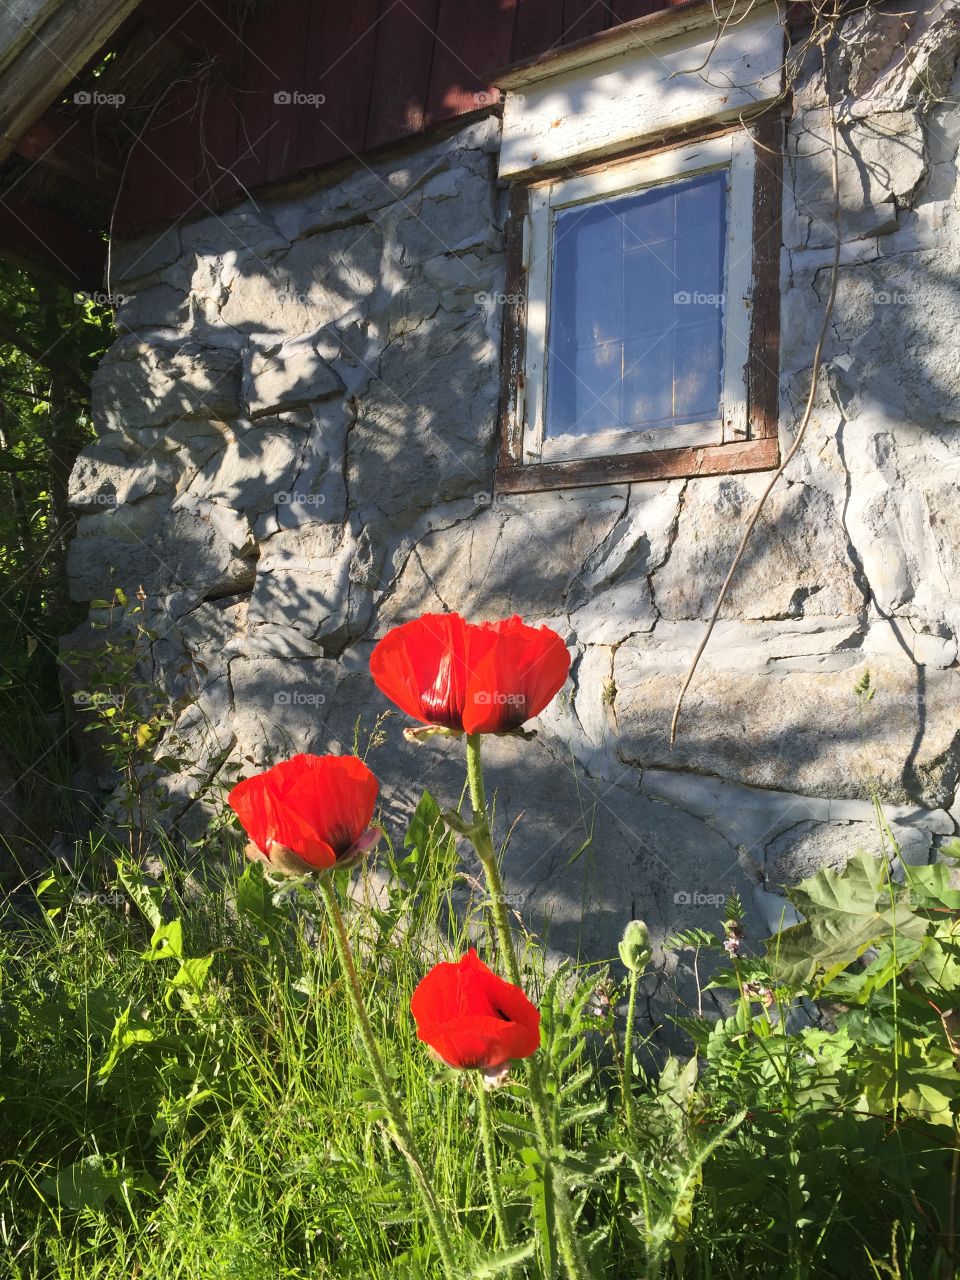 Lovely poppies